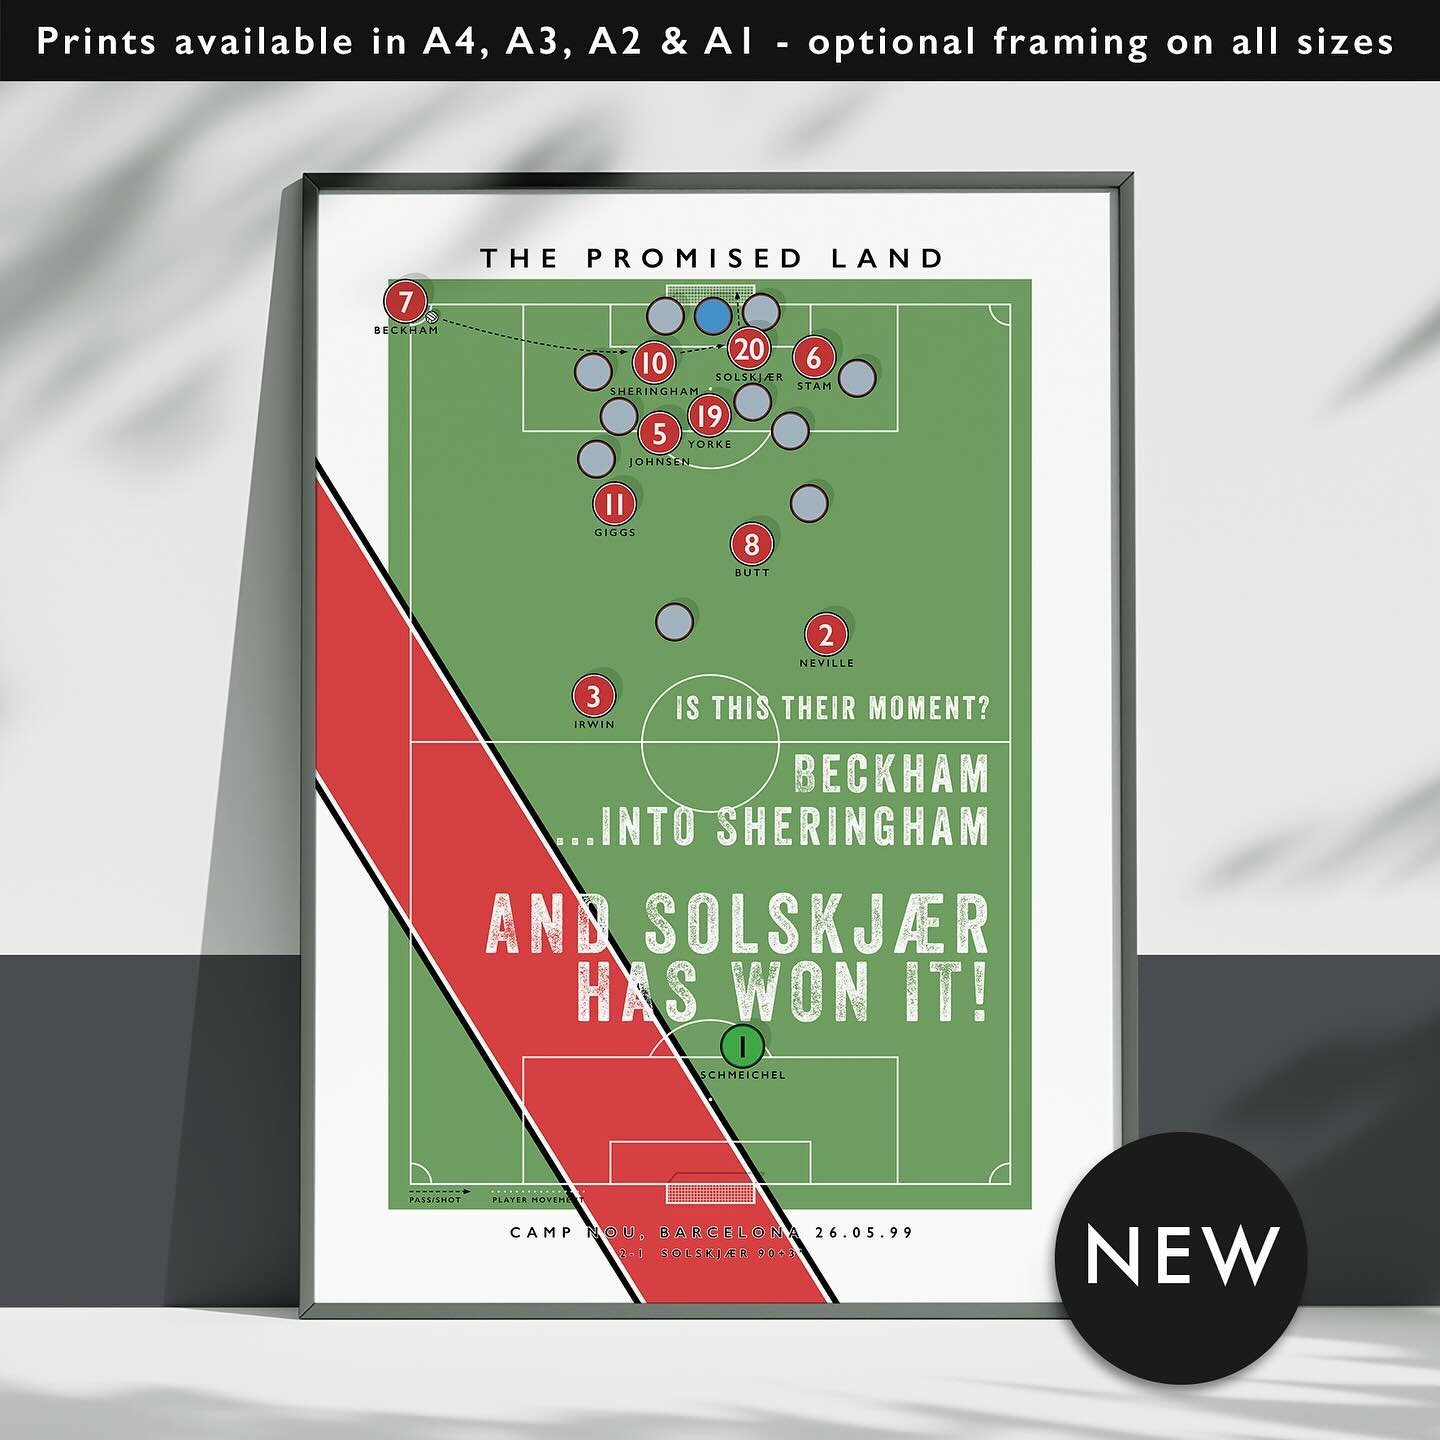 NEW: Manchester United Solskj&aelig;r 1999

Prints available in A4, A3, A2 &amp; A1 with optional framing 

Get 10% off until midnight with the discount code
THE-PROMISED-LAND

Shop now: matthewjiwood.com/goooal/solskja&hellip;

#MUFC #ManUnited #Man